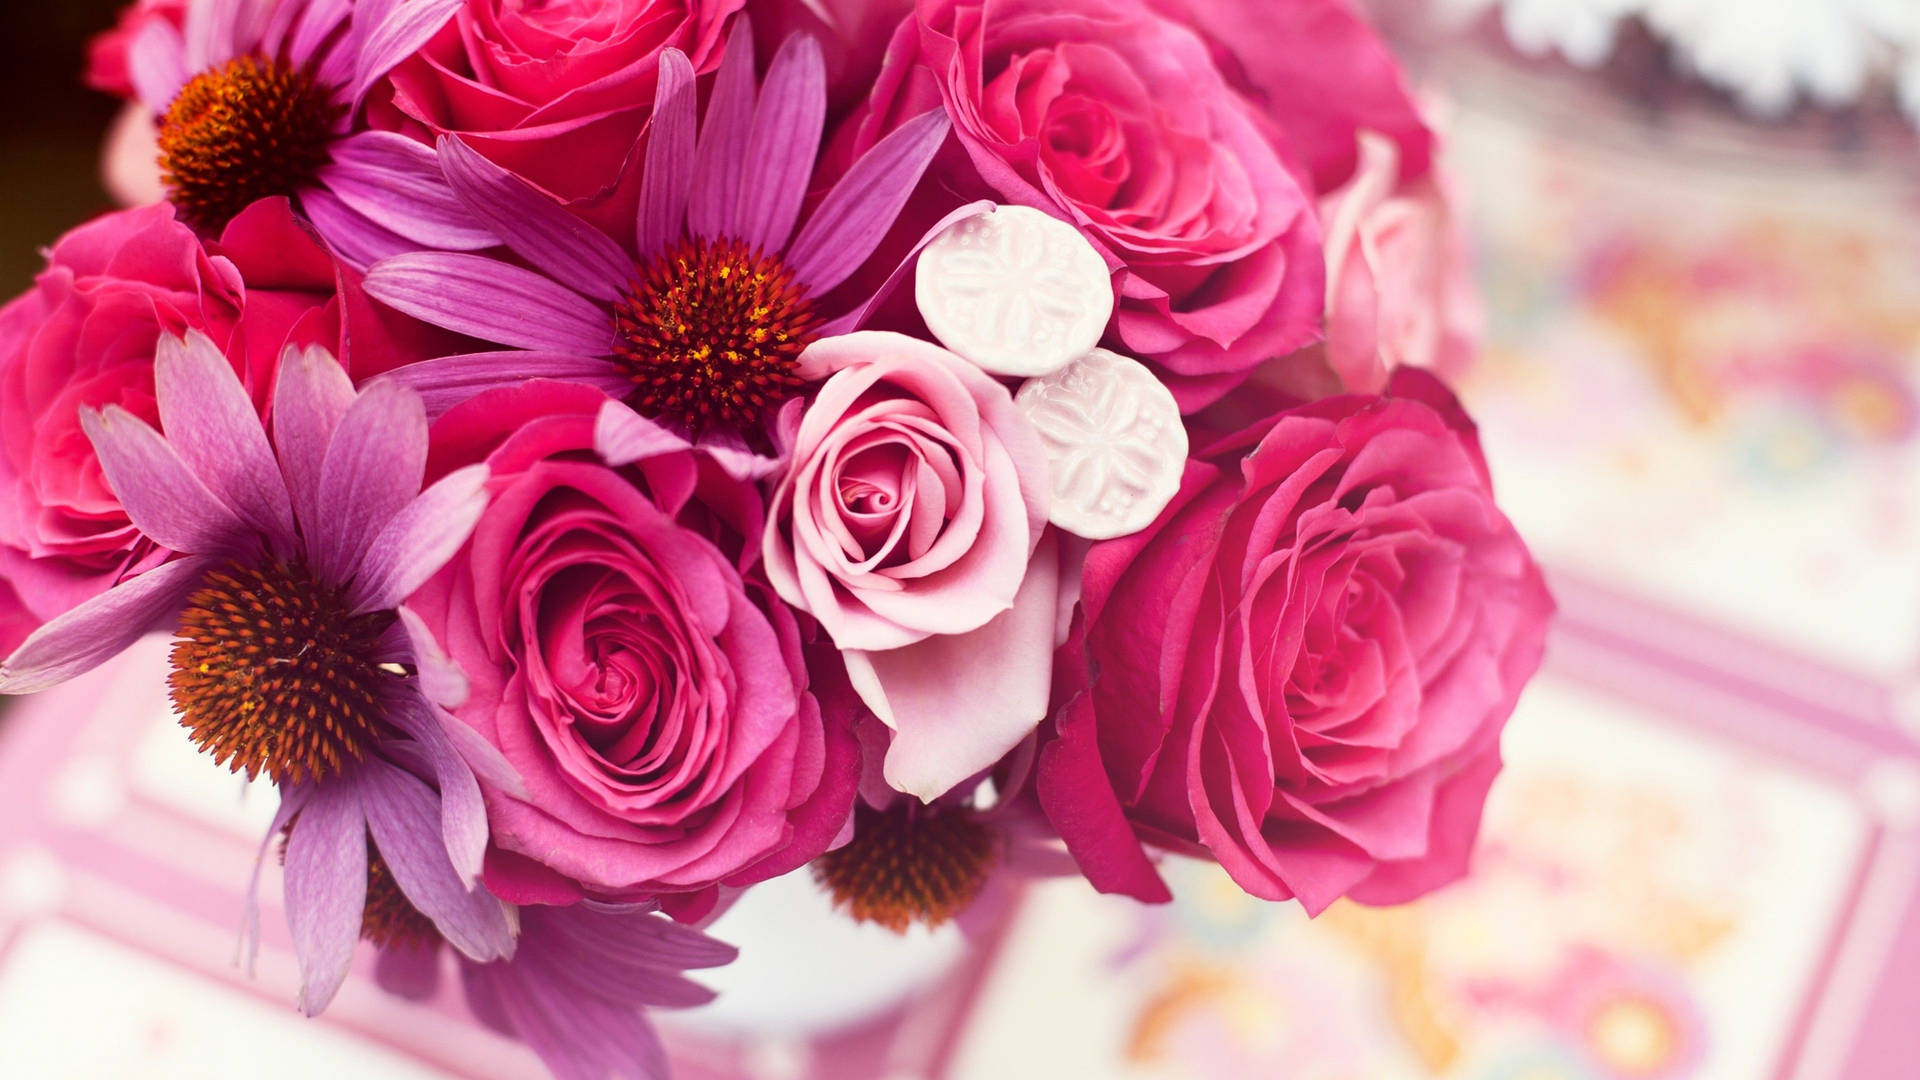 Bouquet Roses And Coneflowers Wallpaper